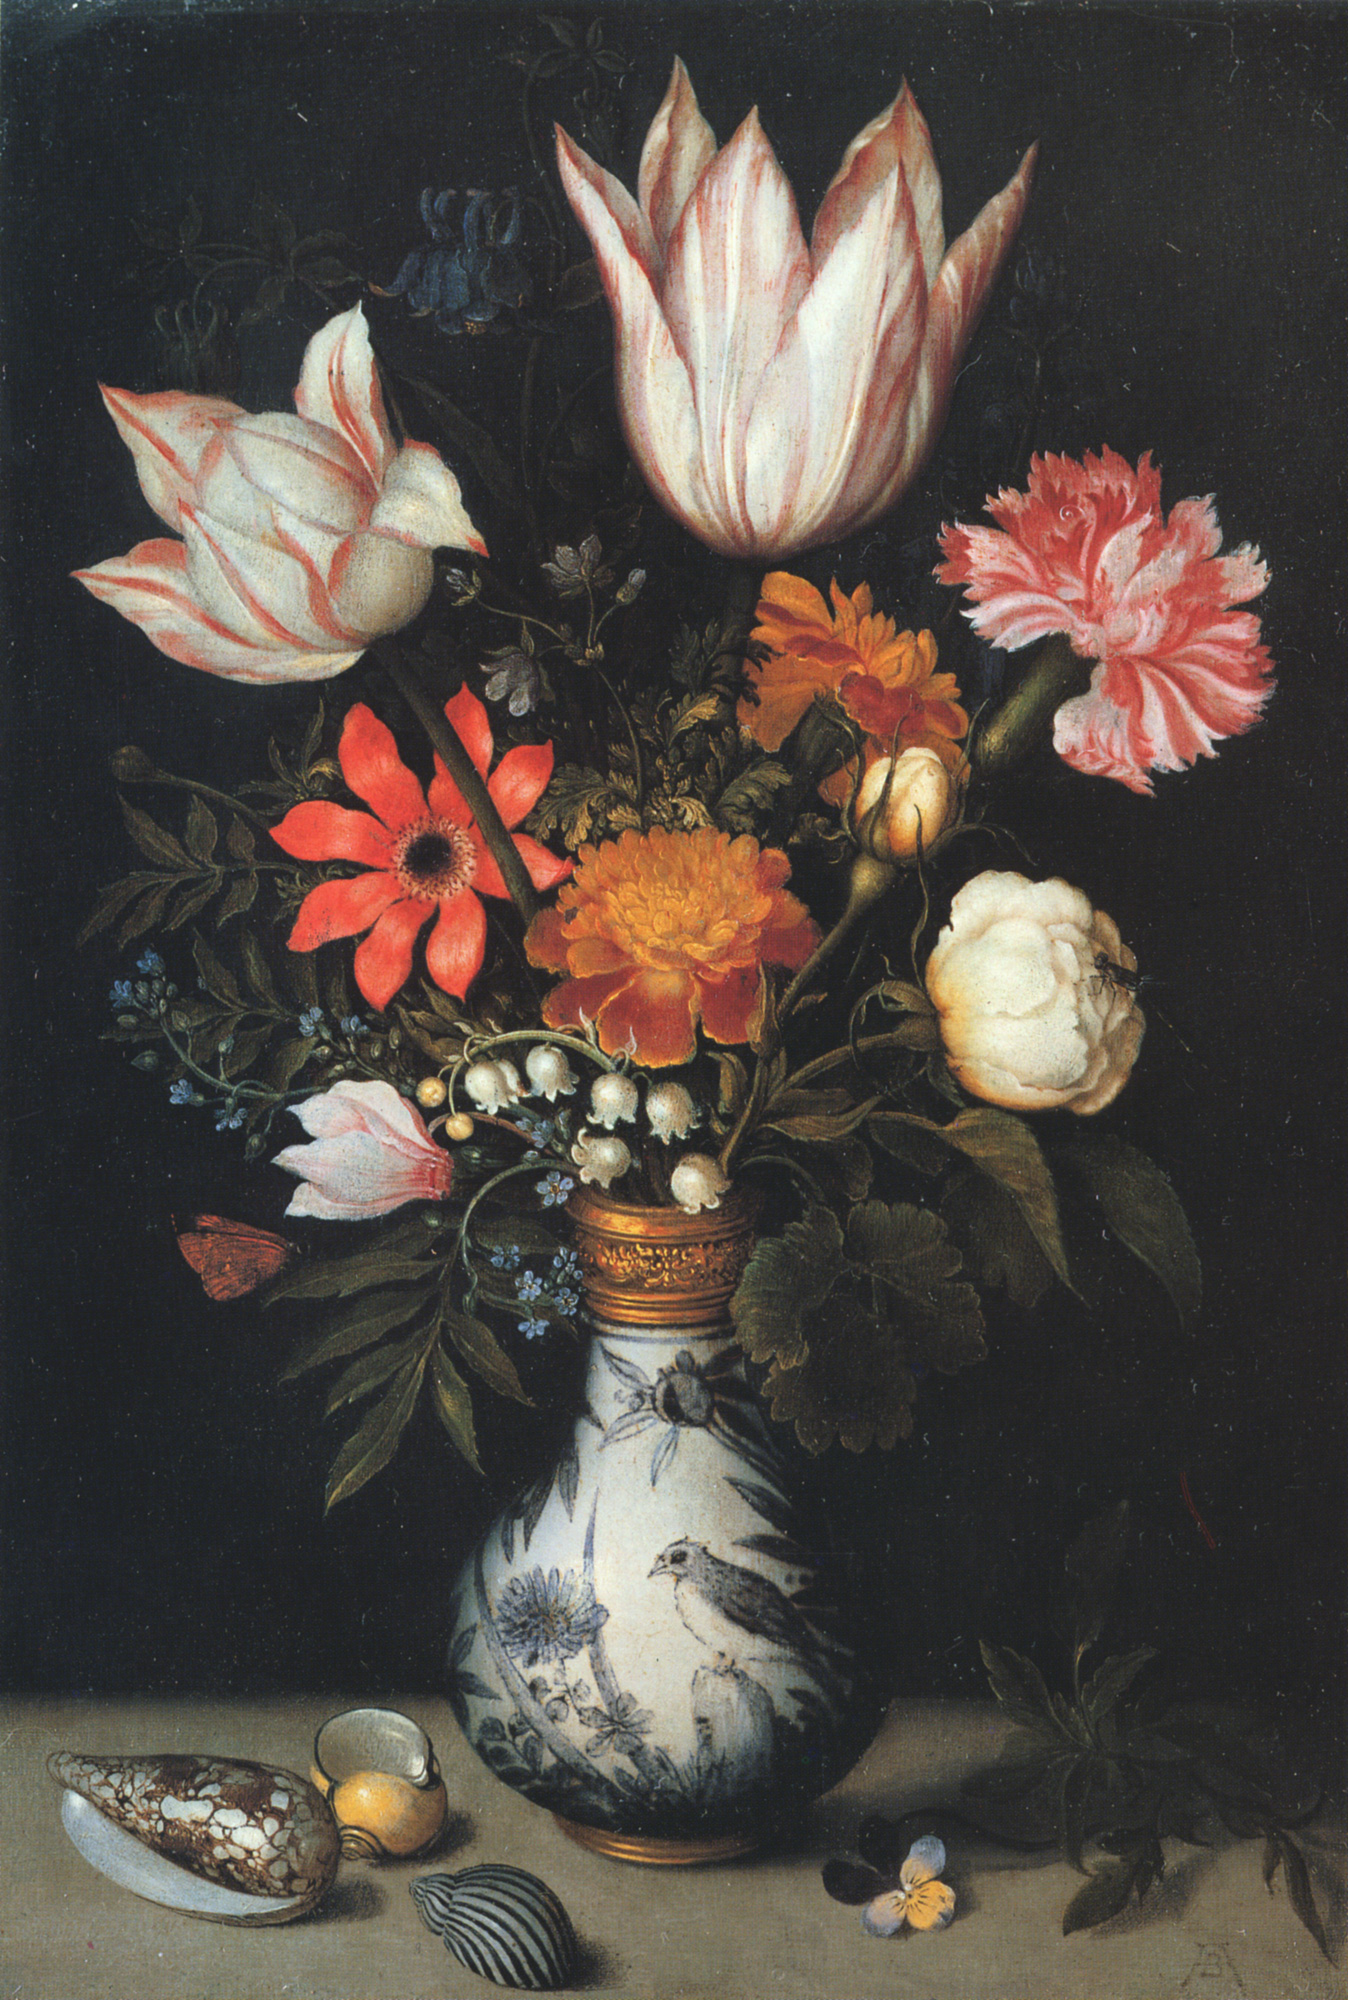 Tulips, Roses, a Pink and White Carnation, Forgets-Me-Nots, Lilly of the Valley and other Flowers in a Vase (Ambrosius Bosschaert the Elder, ca. 1619, oil on copper)